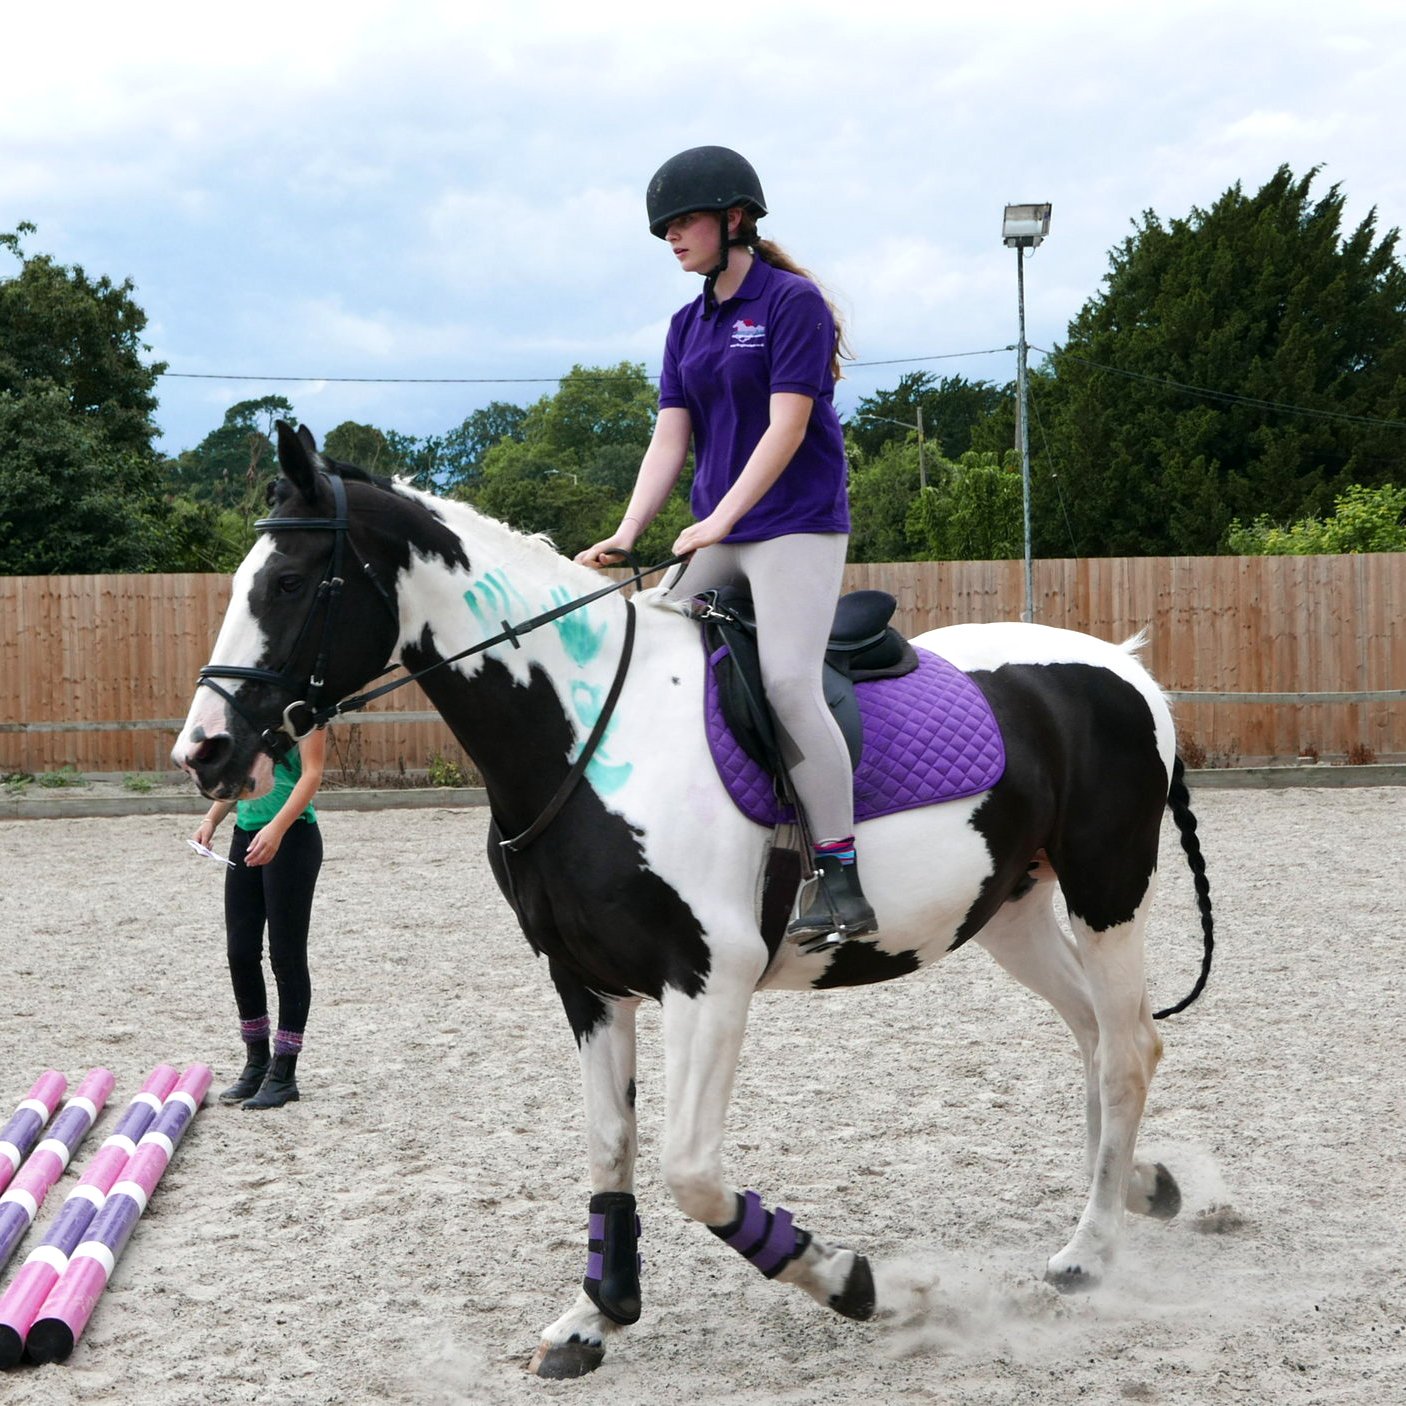 A young girl riding a brown and white horse with minder watching over her, wearing Foxglove Farm polo t-shirts in signature purple with logo designed by Yeswaydesign